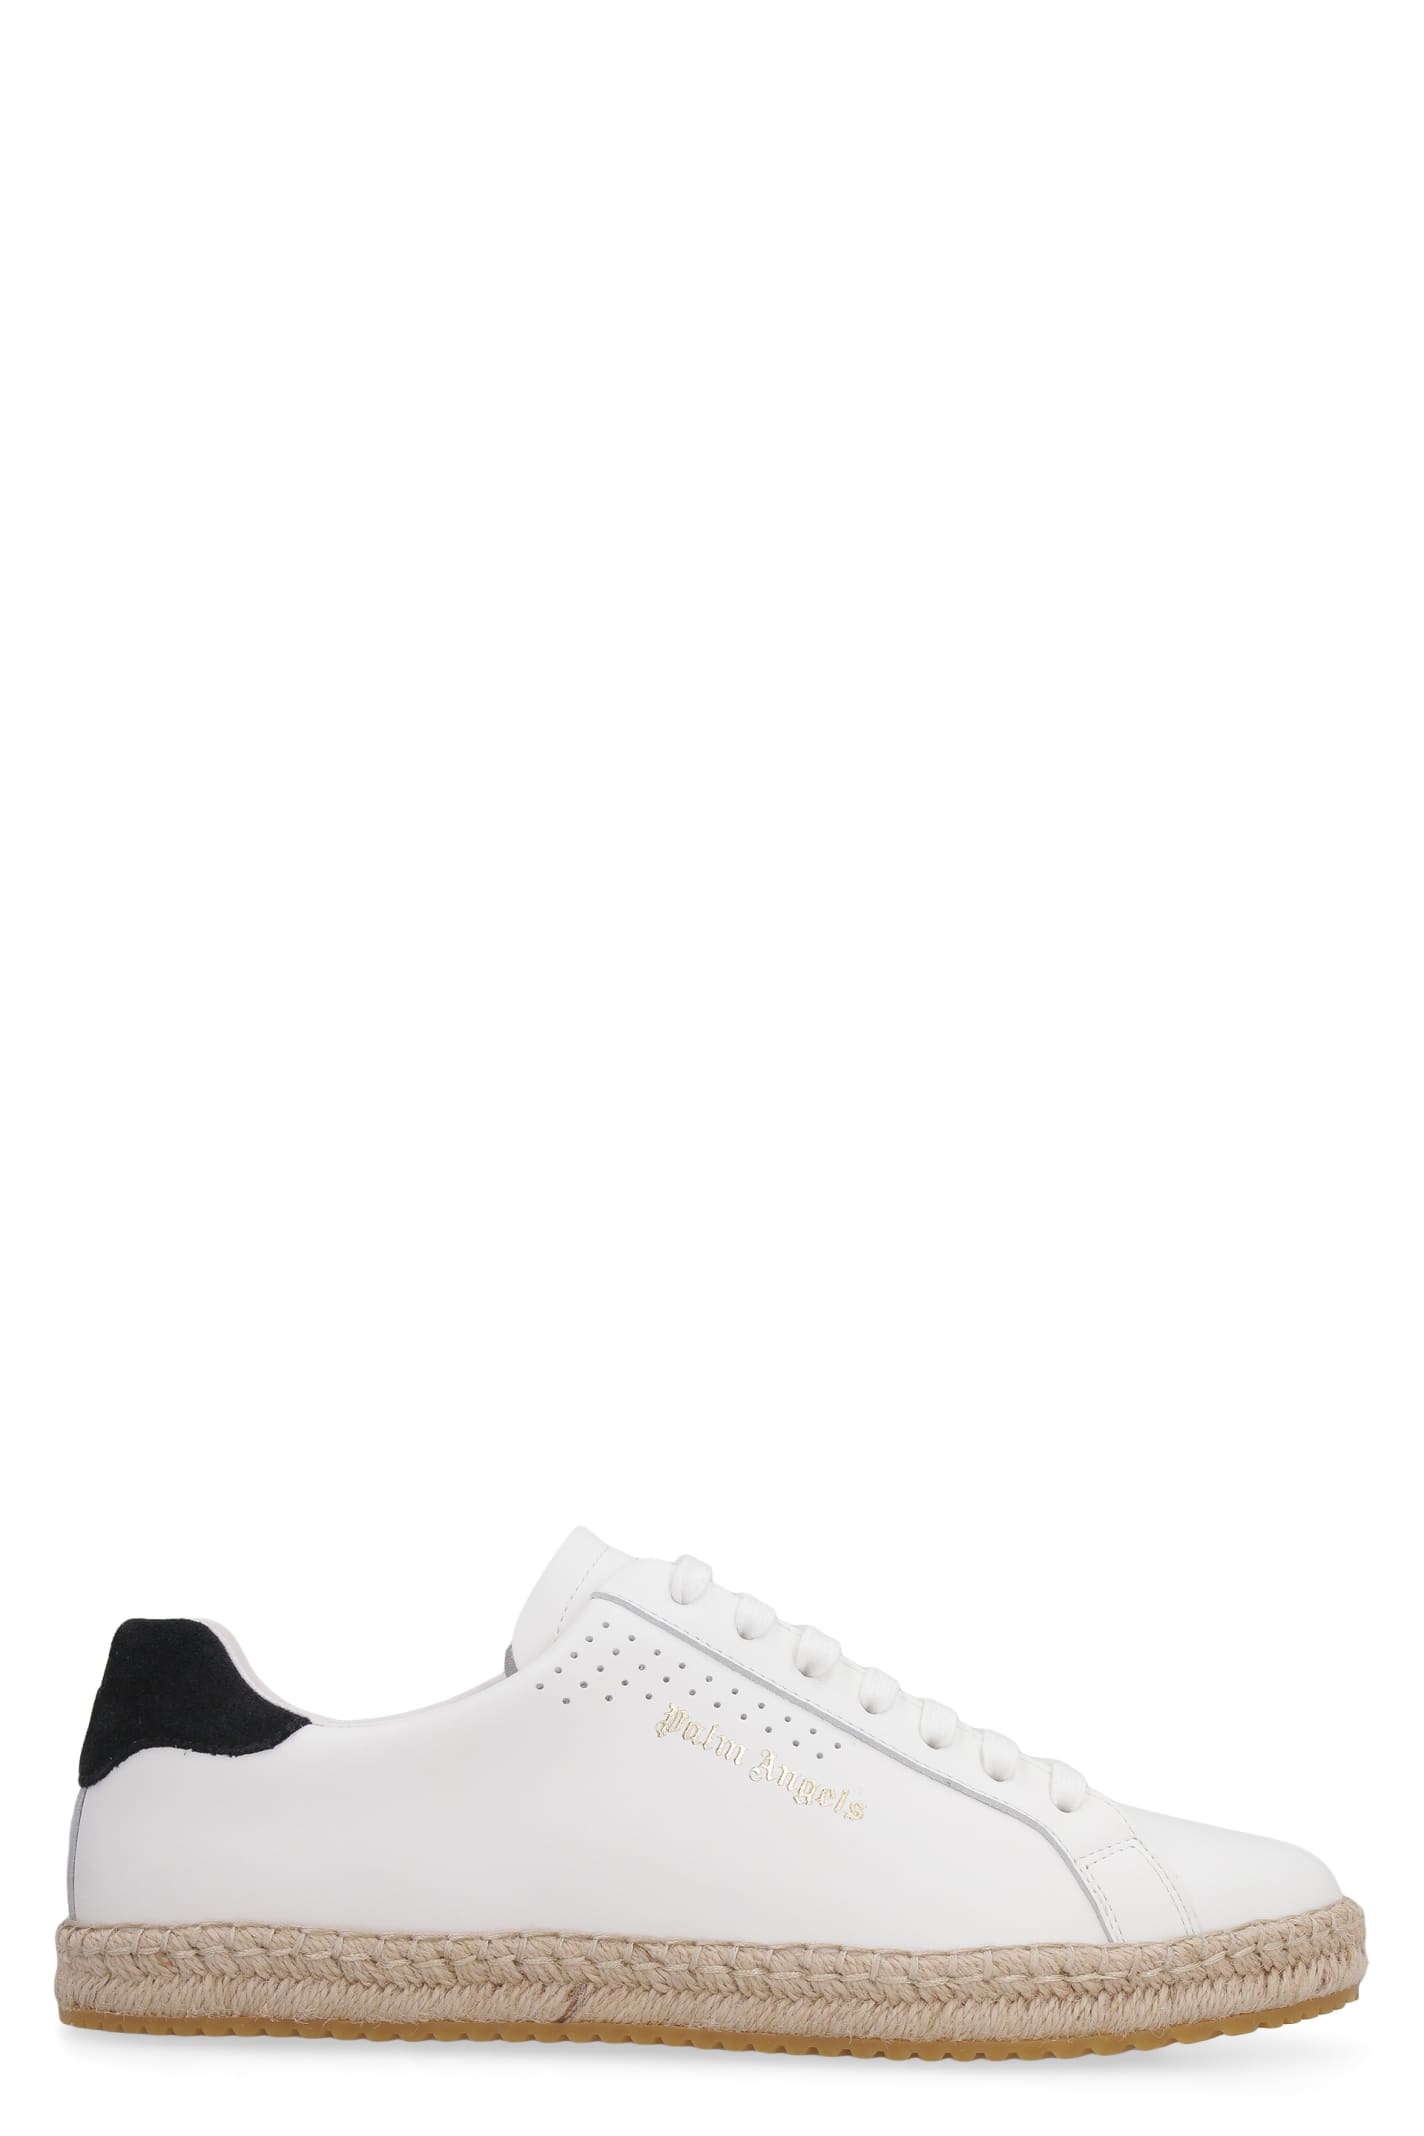 Palm Angels Leather Low-top Sneakers